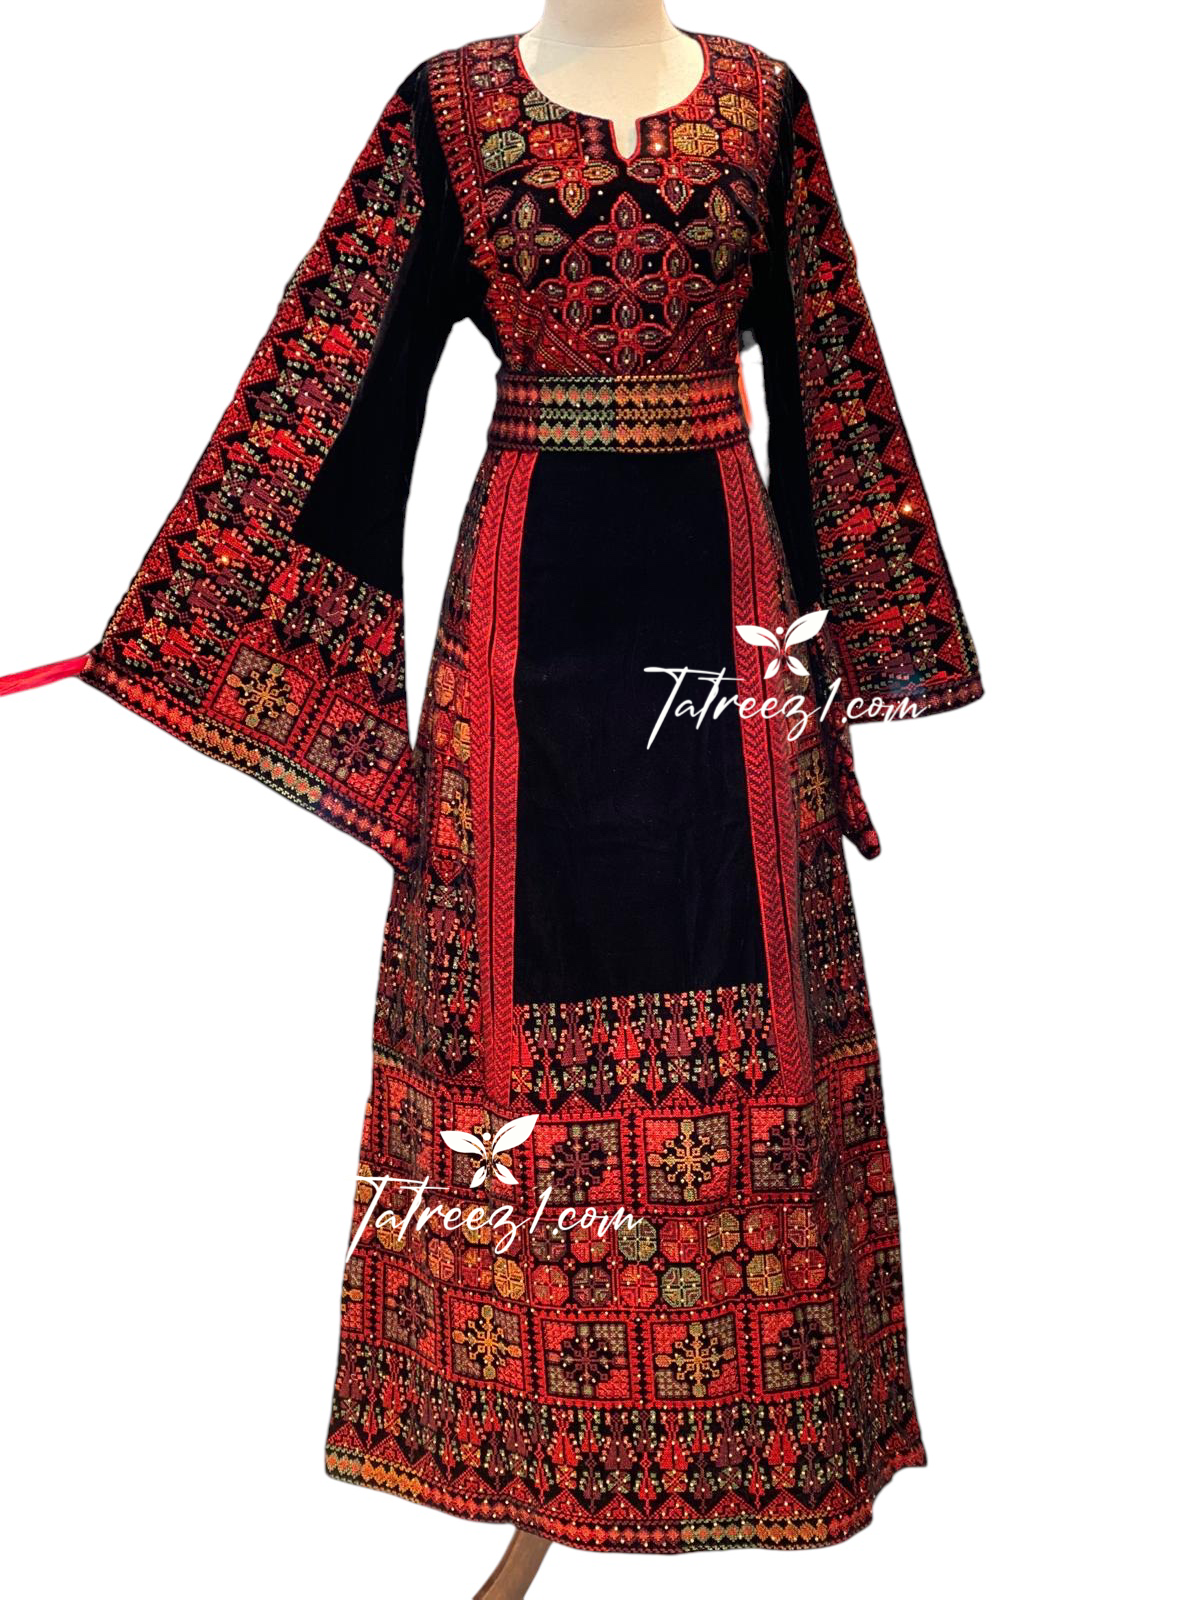 Red& Black Velvet Tradtional  Stoned Colored Embroidered Palestinian Fellahi Thobe